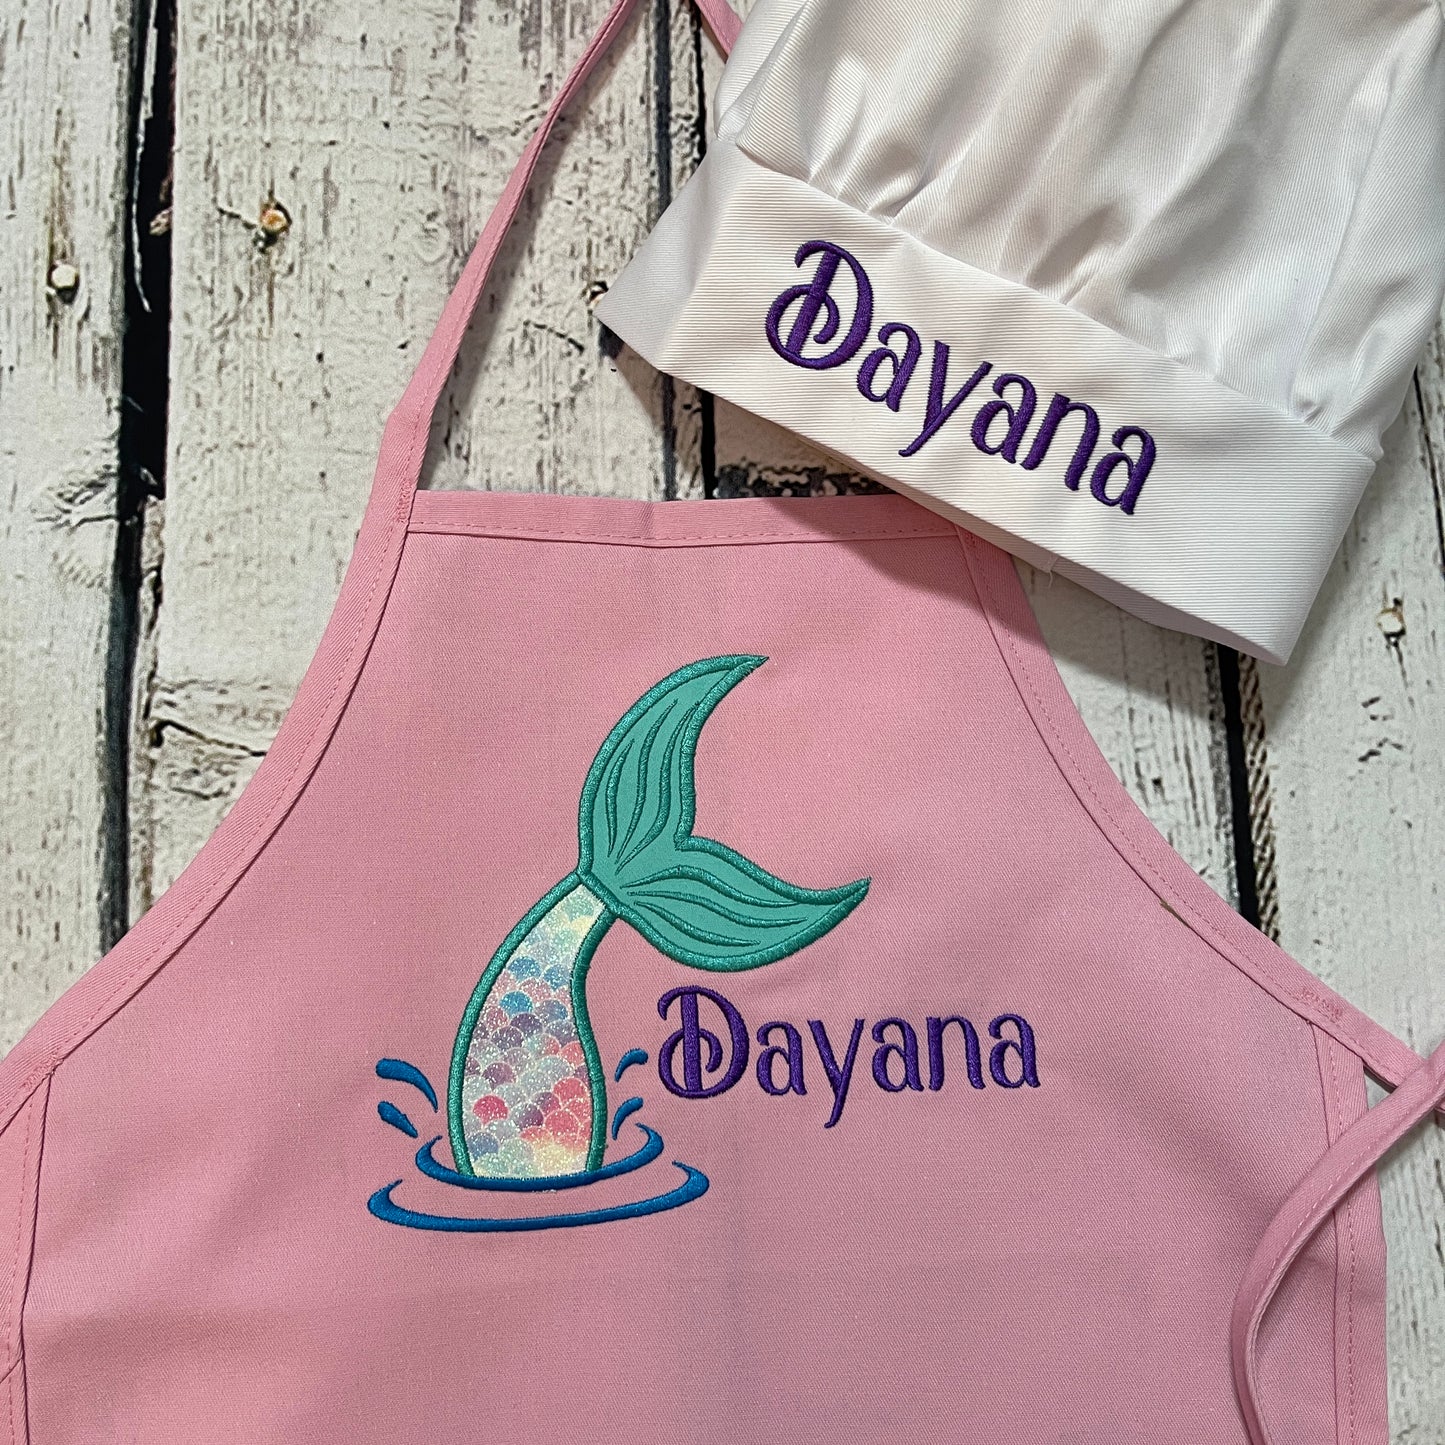 Girls Personalized Embroidered Apron with mermaid tail with name